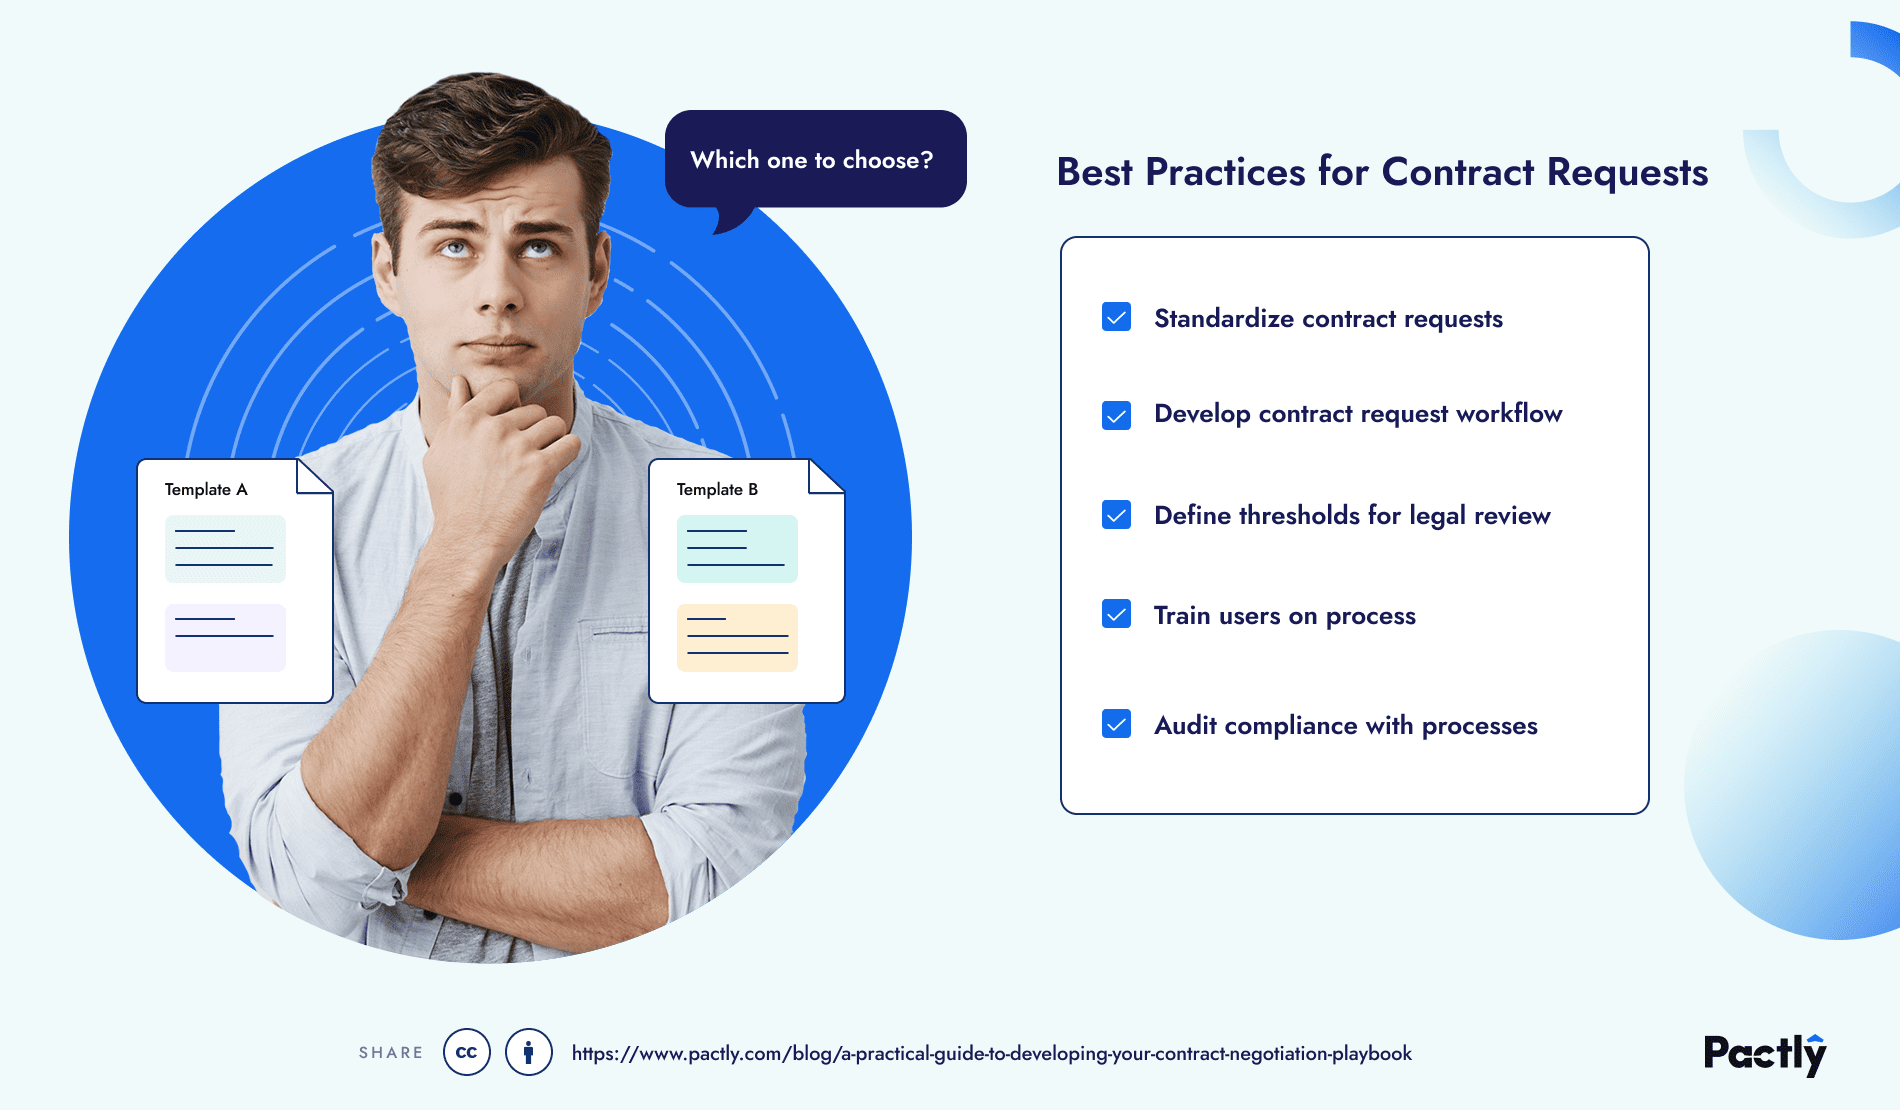 Best practices for contract requests